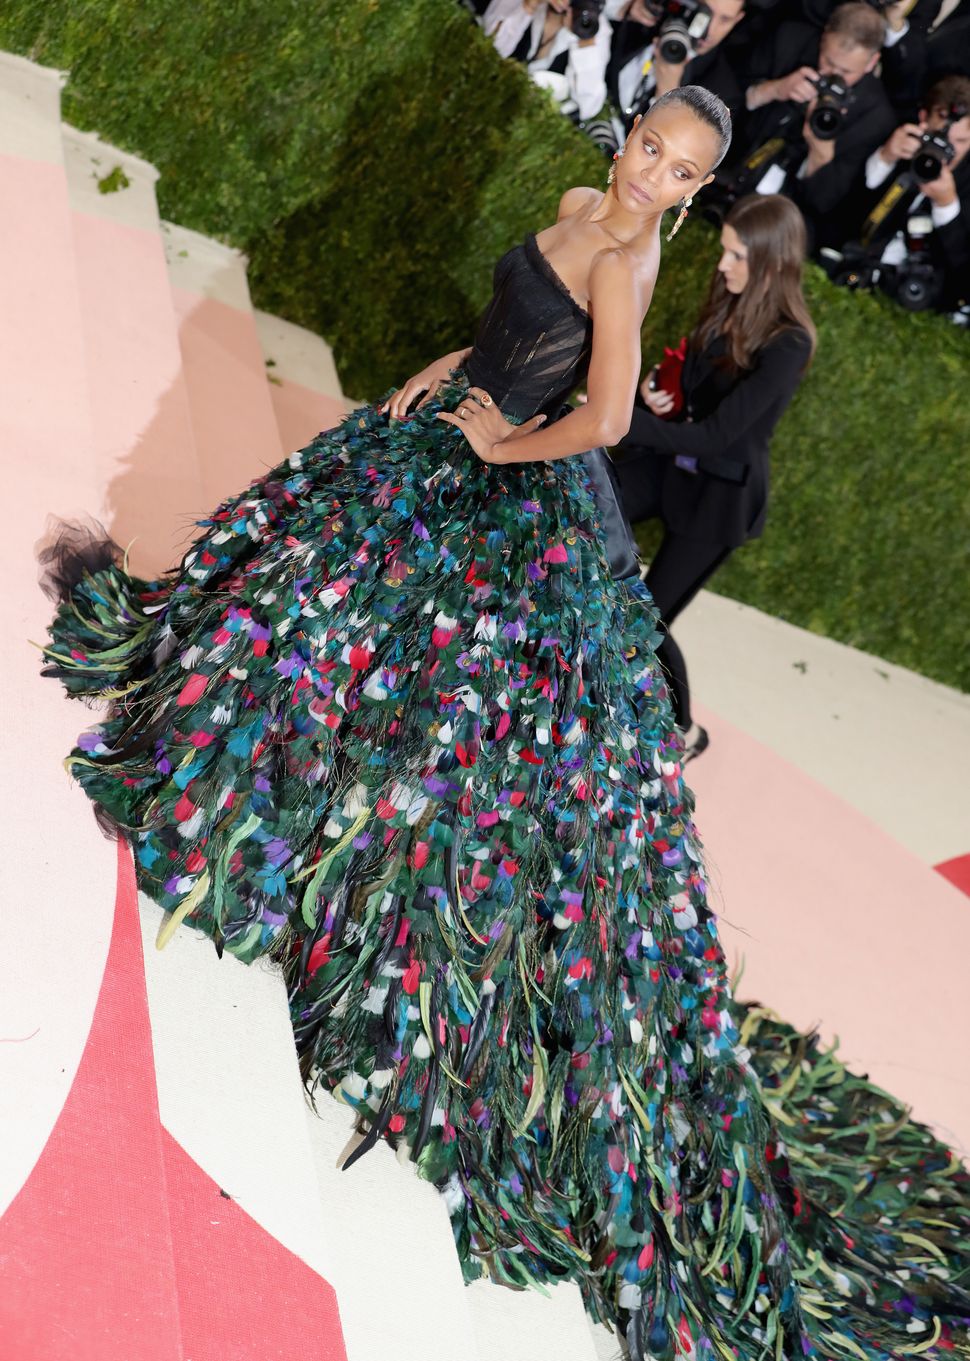 56 Exclusive Photos From The 2016 Met Gala That You Won't See Anywhere ...